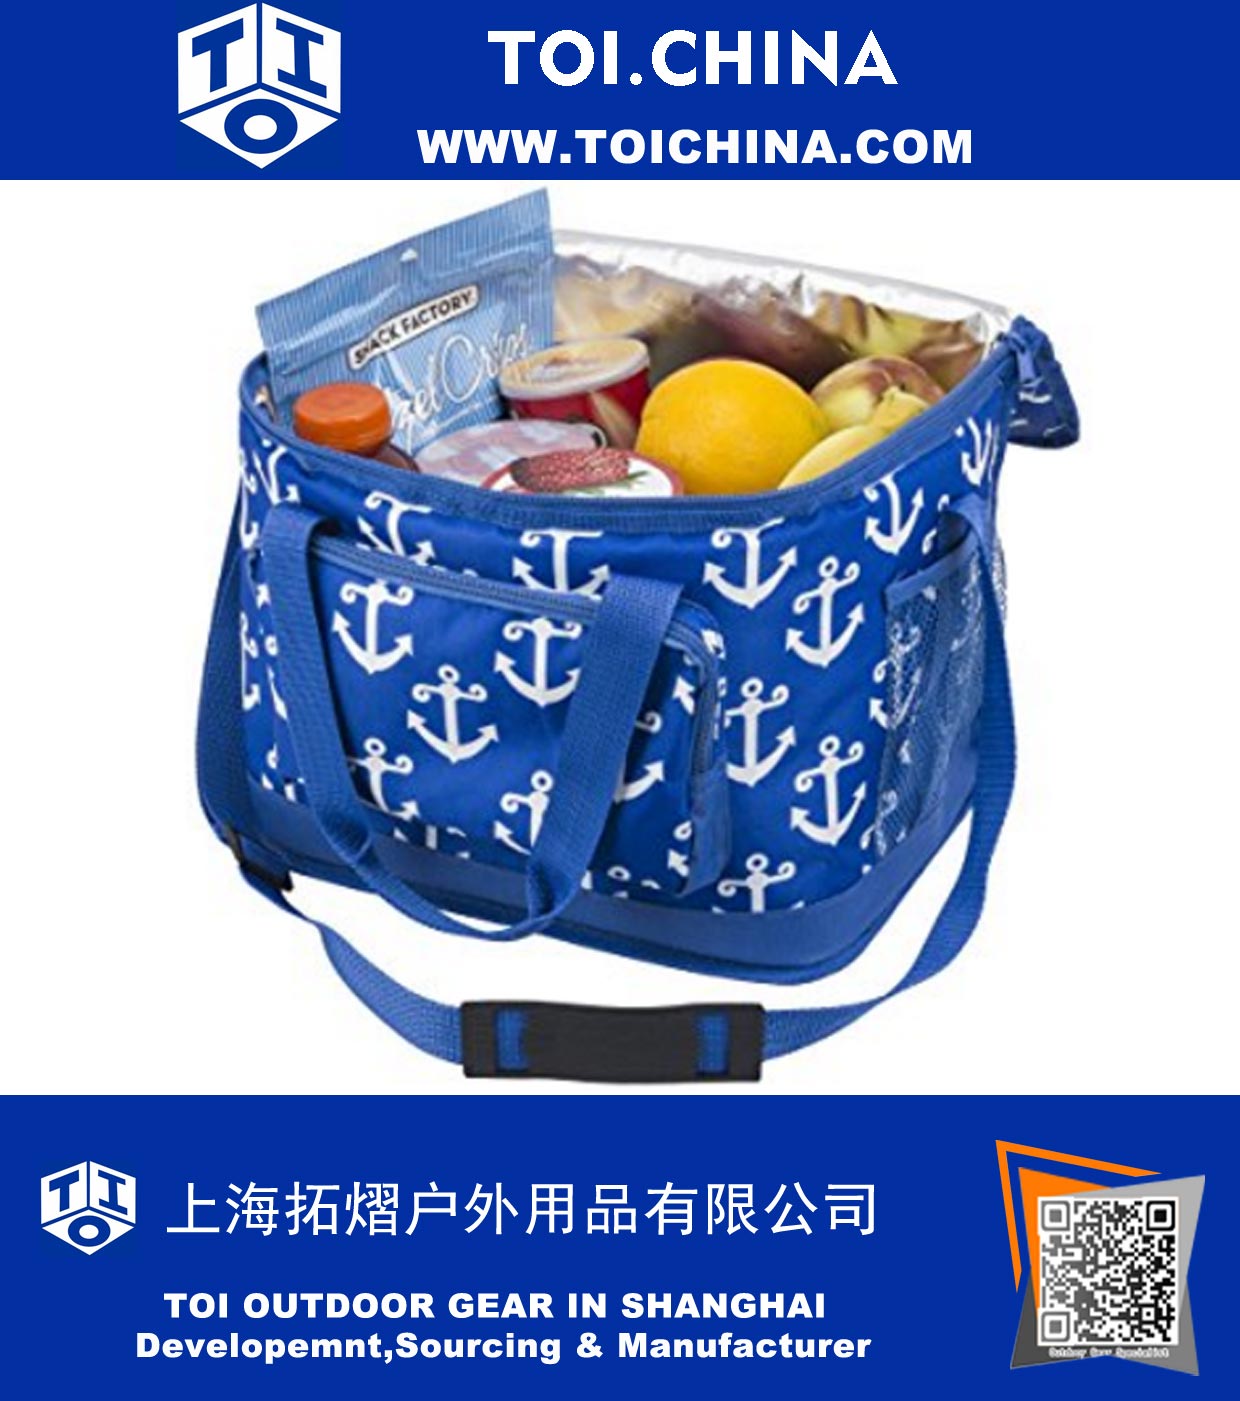 Insulated Collapsible Cooler Bag